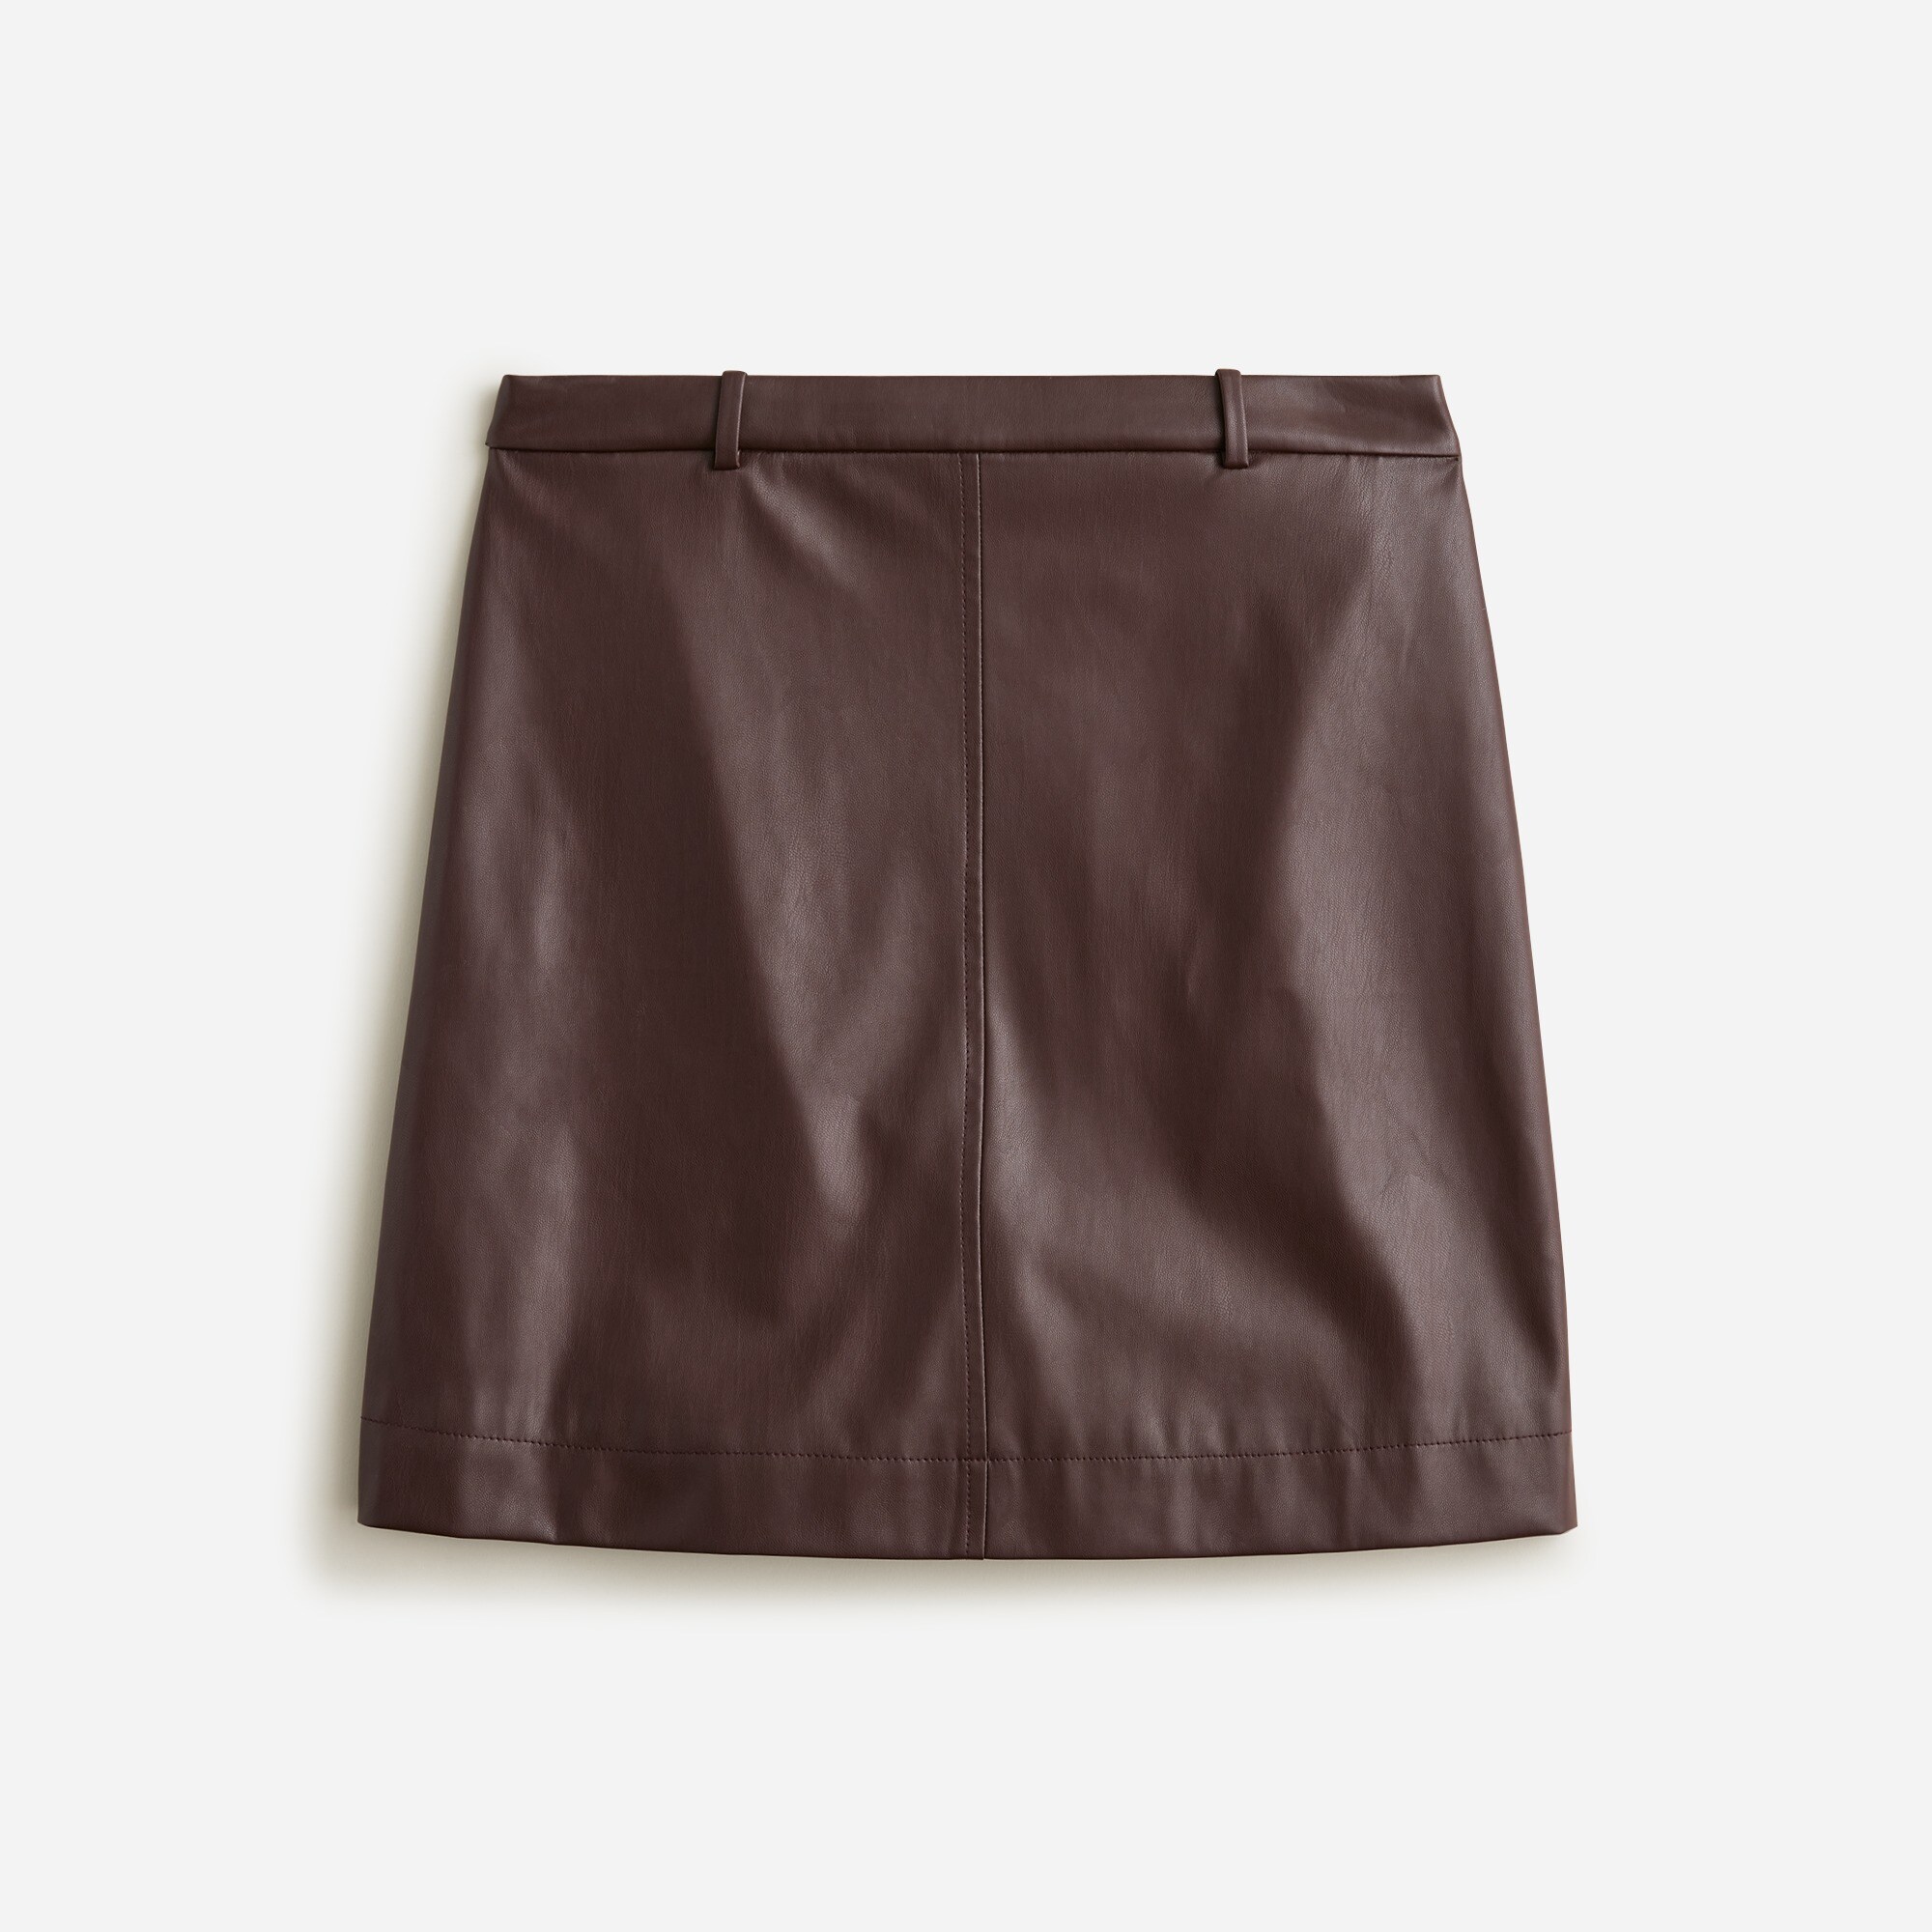  Trouser mini skirt in faux leather